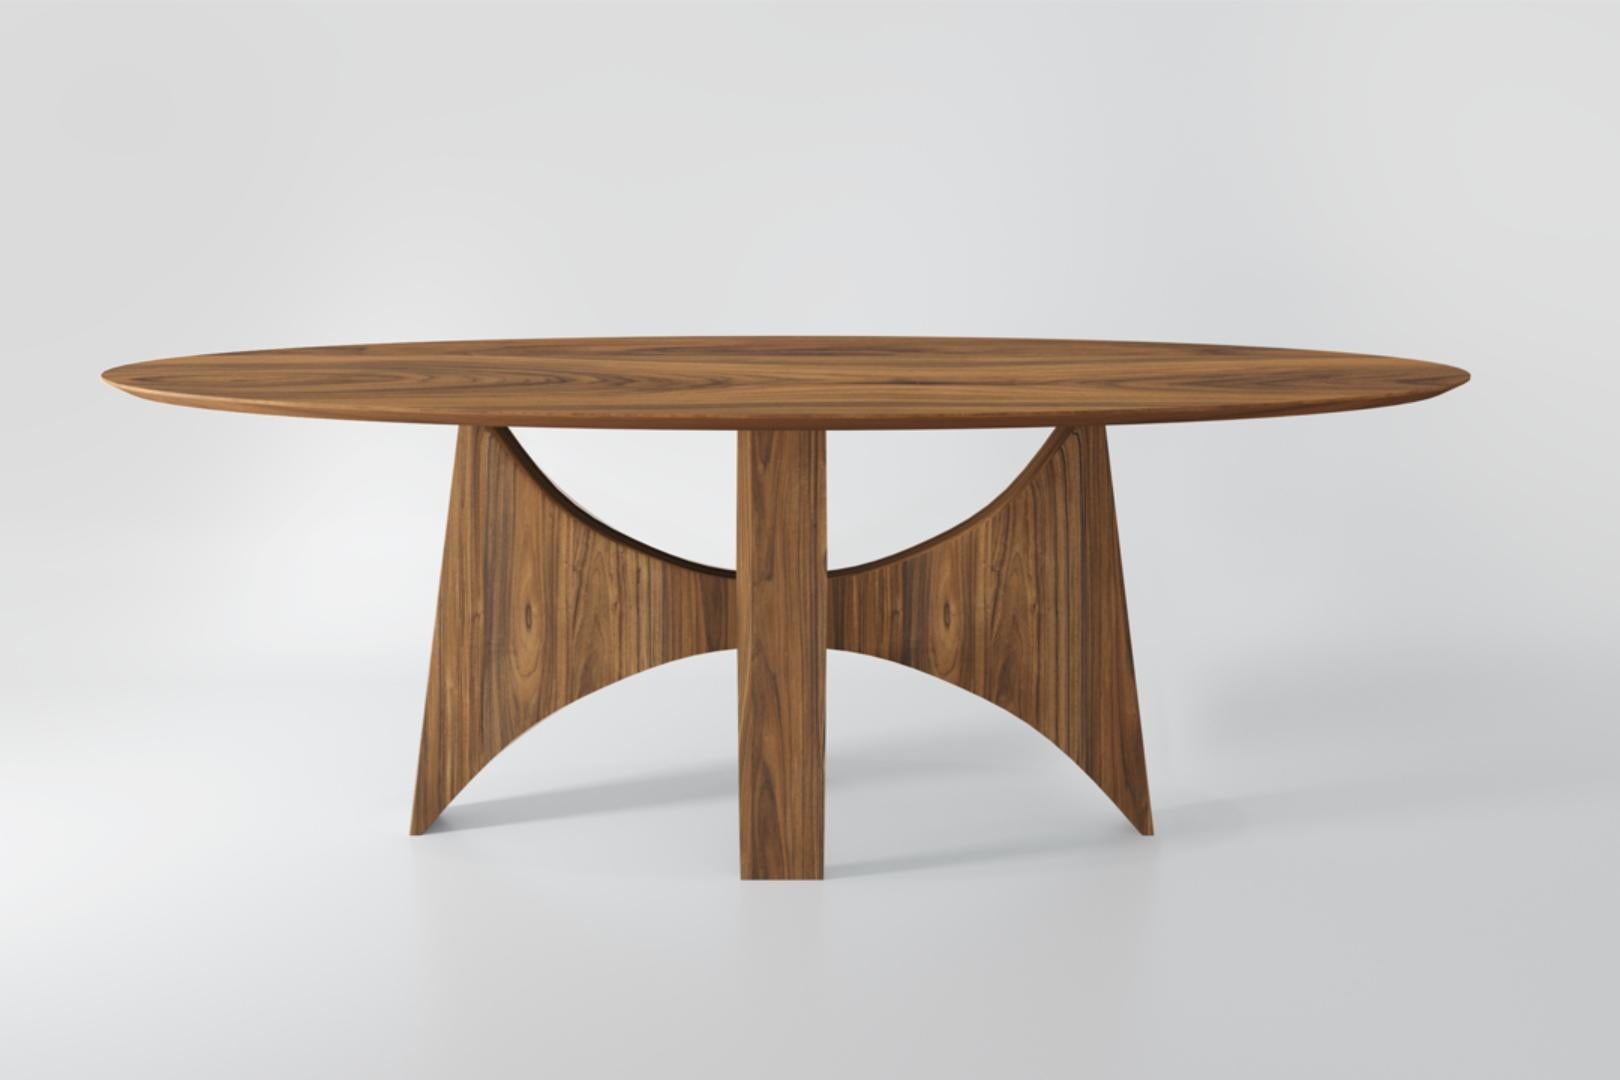 The Planalto Oval Dining Table was inspired by the curves of the works of the master Oscar Niemeyer. Its creation evokes the architect's constructions in Brasília, Brazil, where the sculptural elegance of his design stands out prominently. It can be